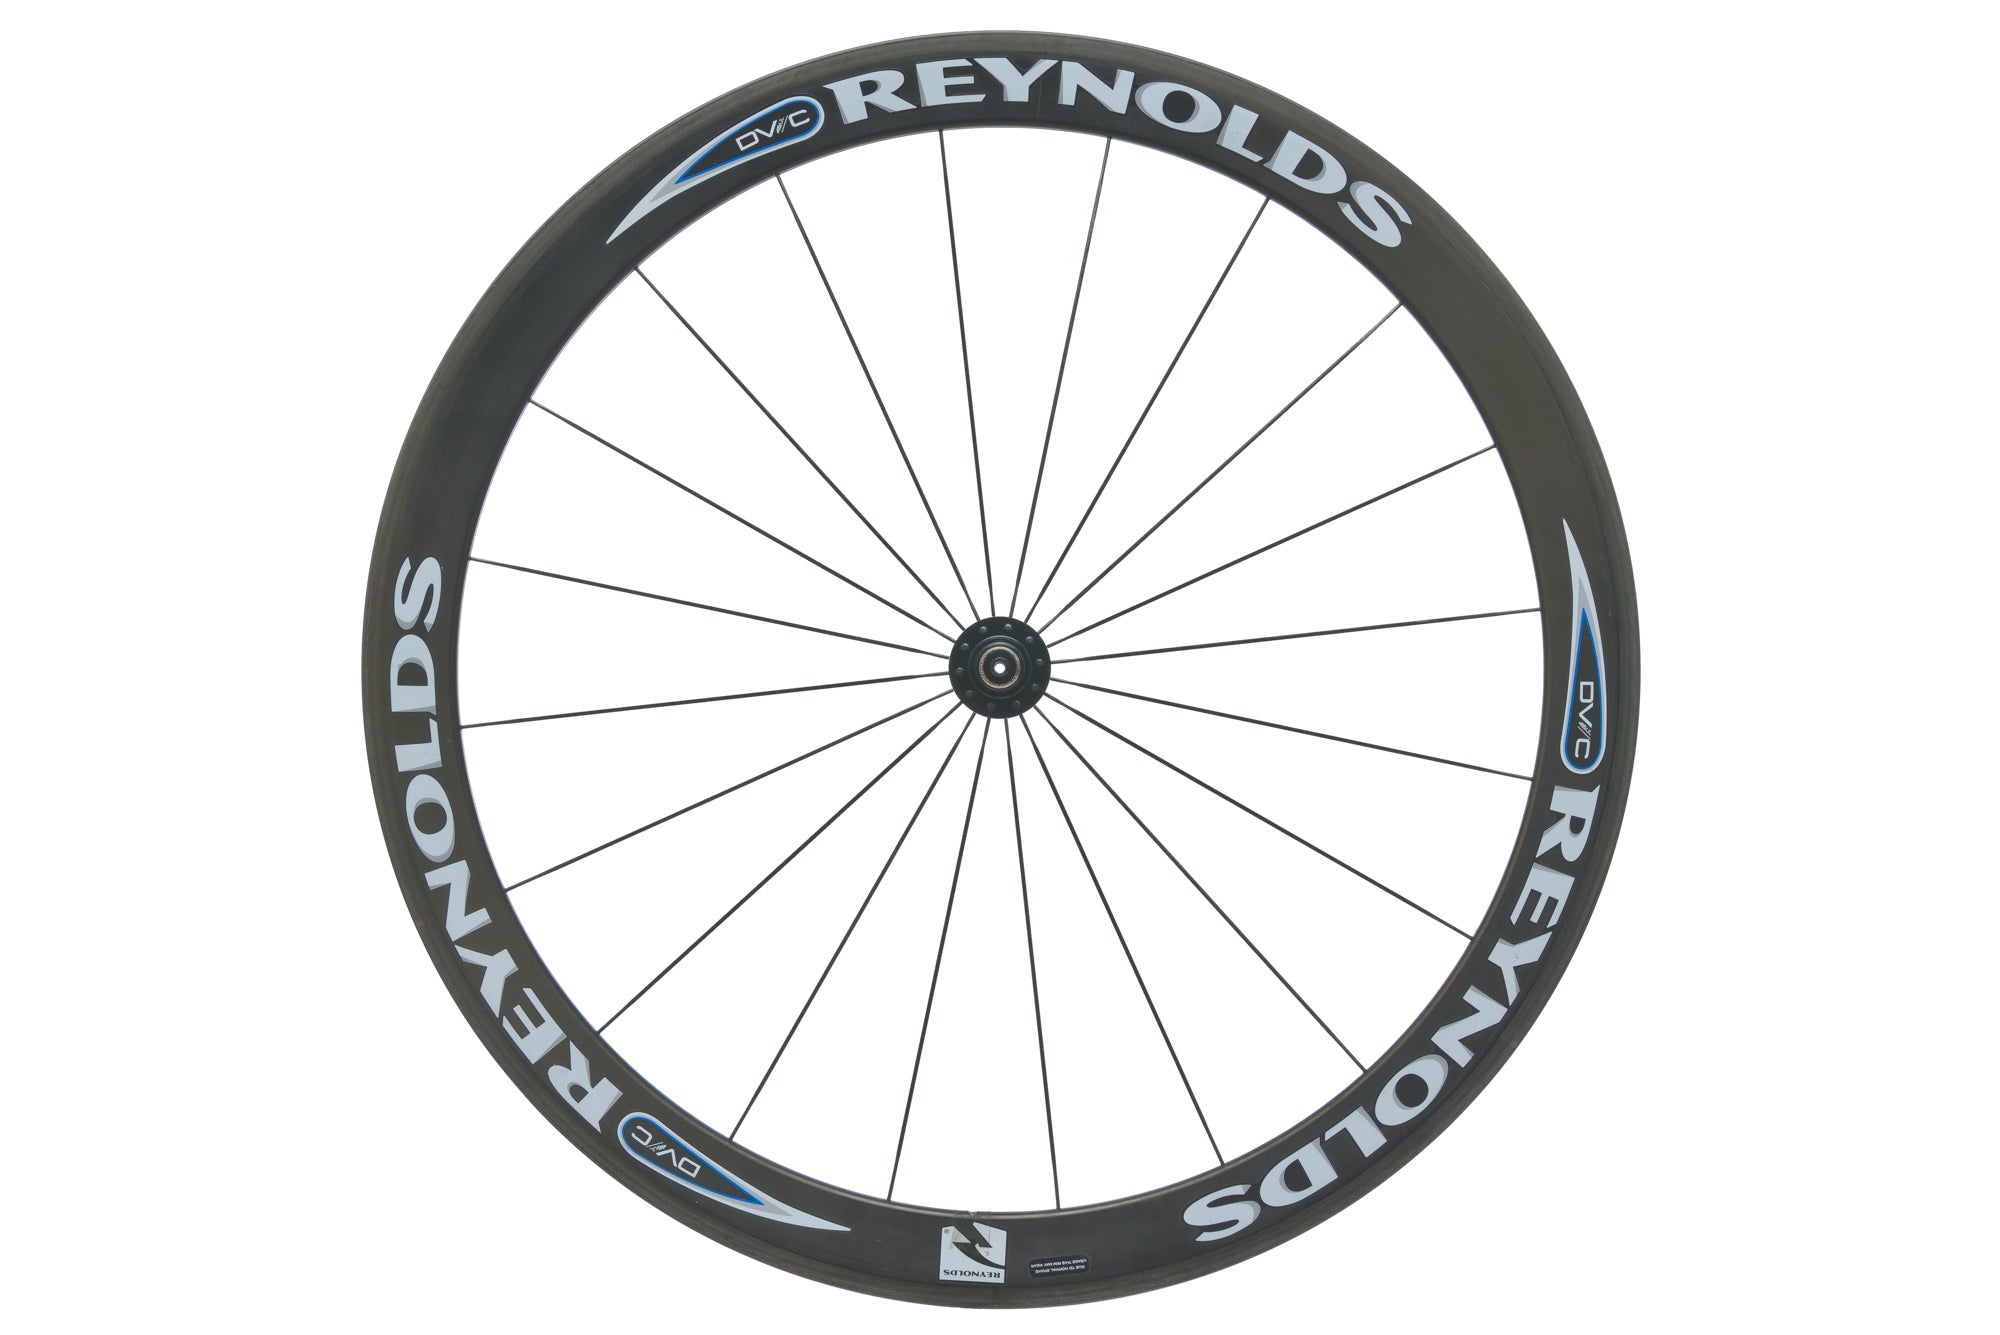 Reynolds DV46 UL Carbon Clincher 700c Front Wheel non-drive side